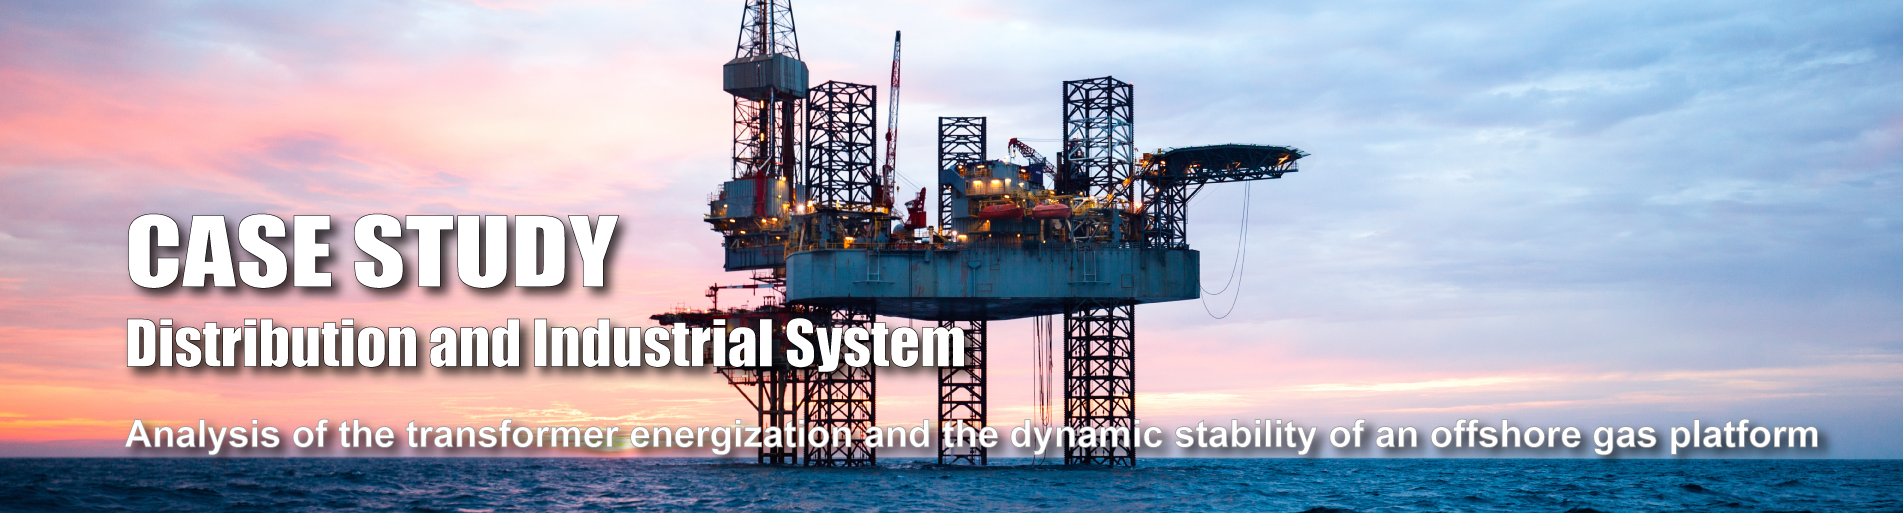 Analysis of the transformer energization and the dynamic stability of an offshore gas platform